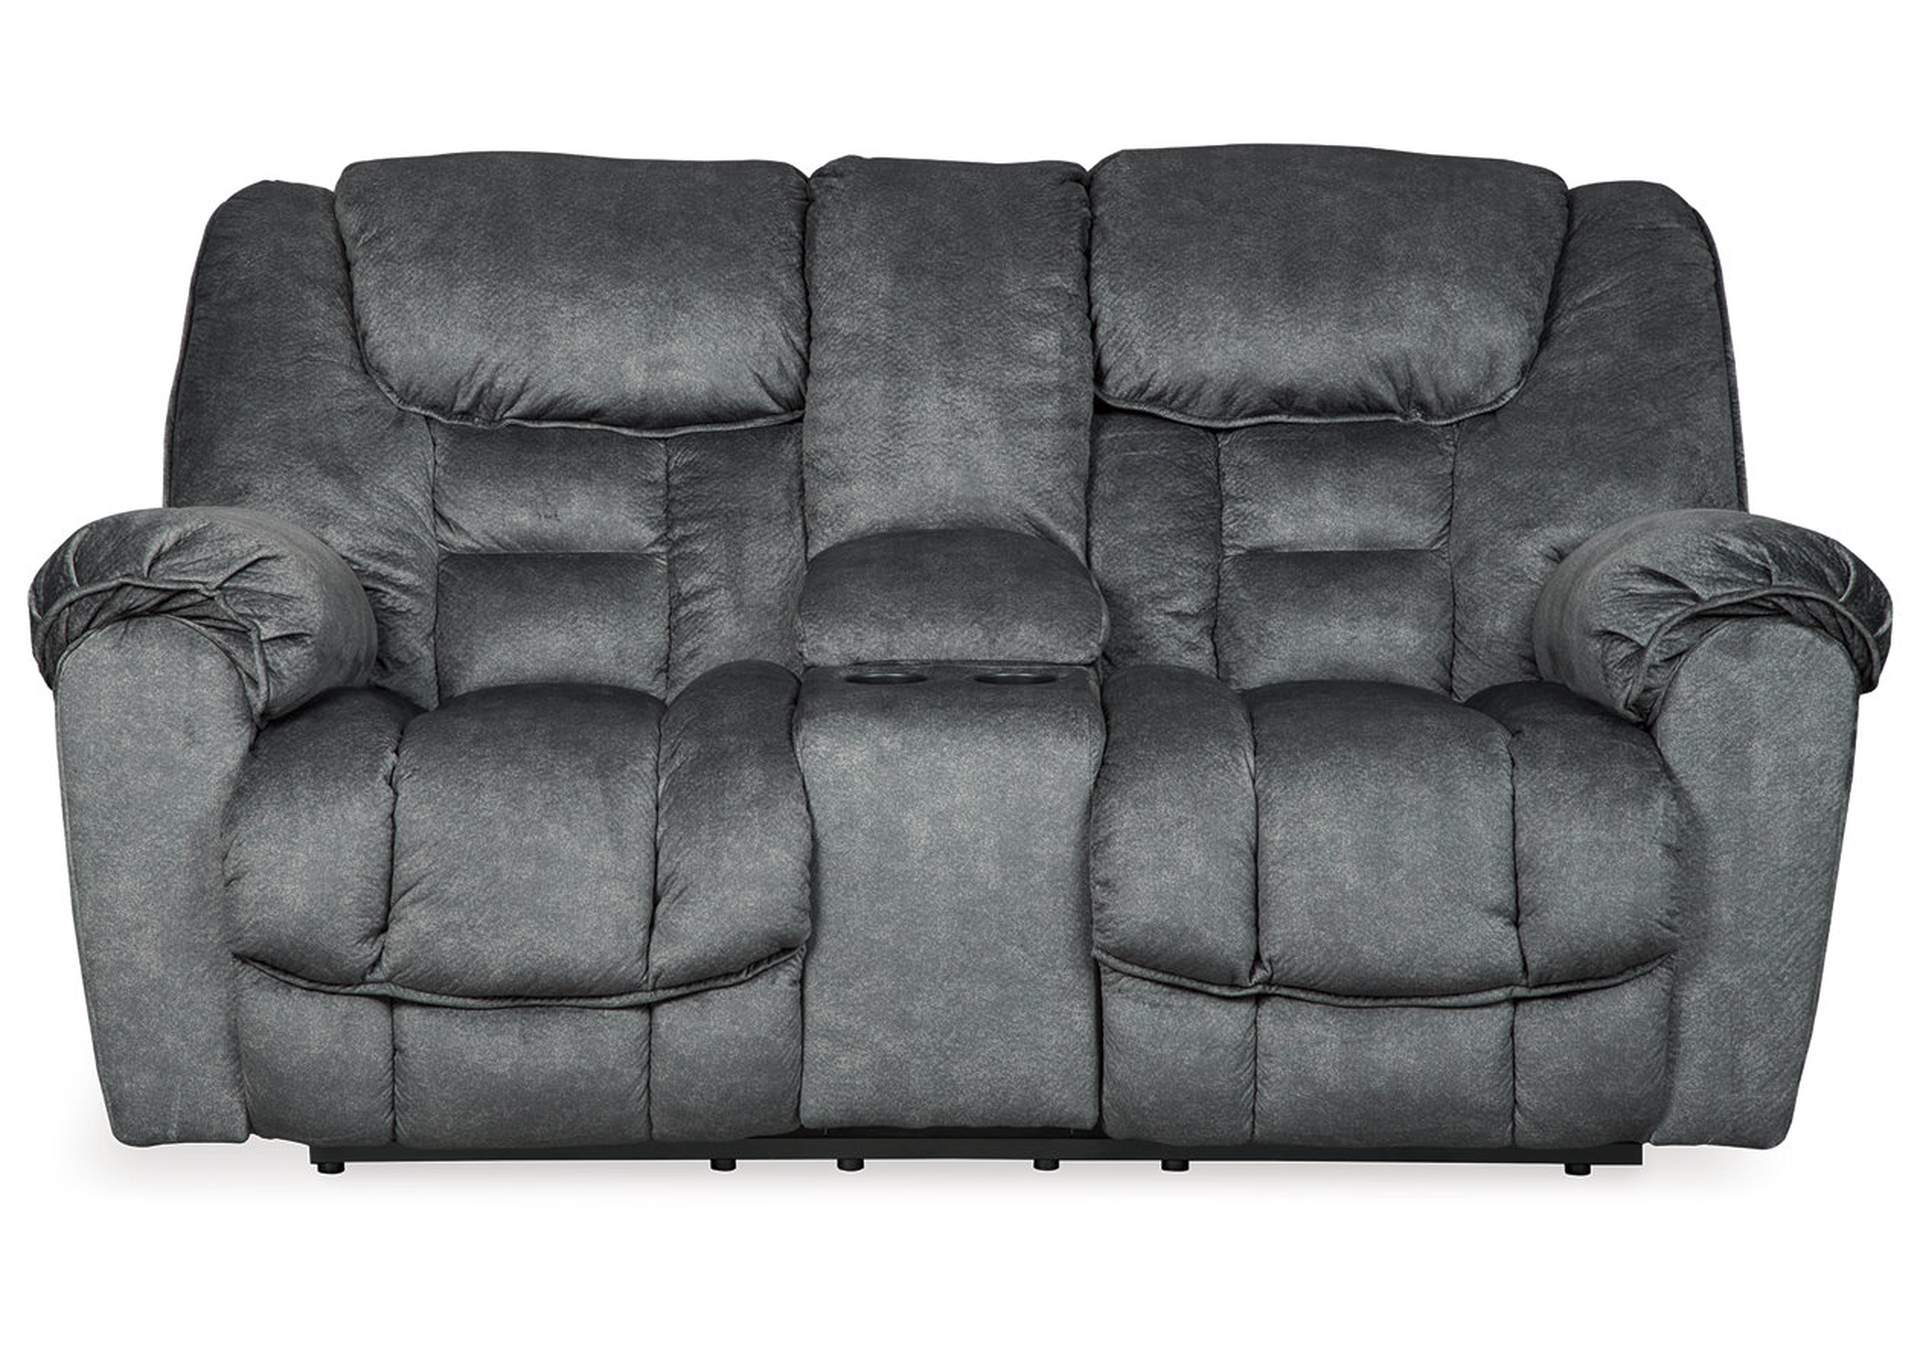 Capehorn Reclining Loveseat with Console,Signature Design By Ashley